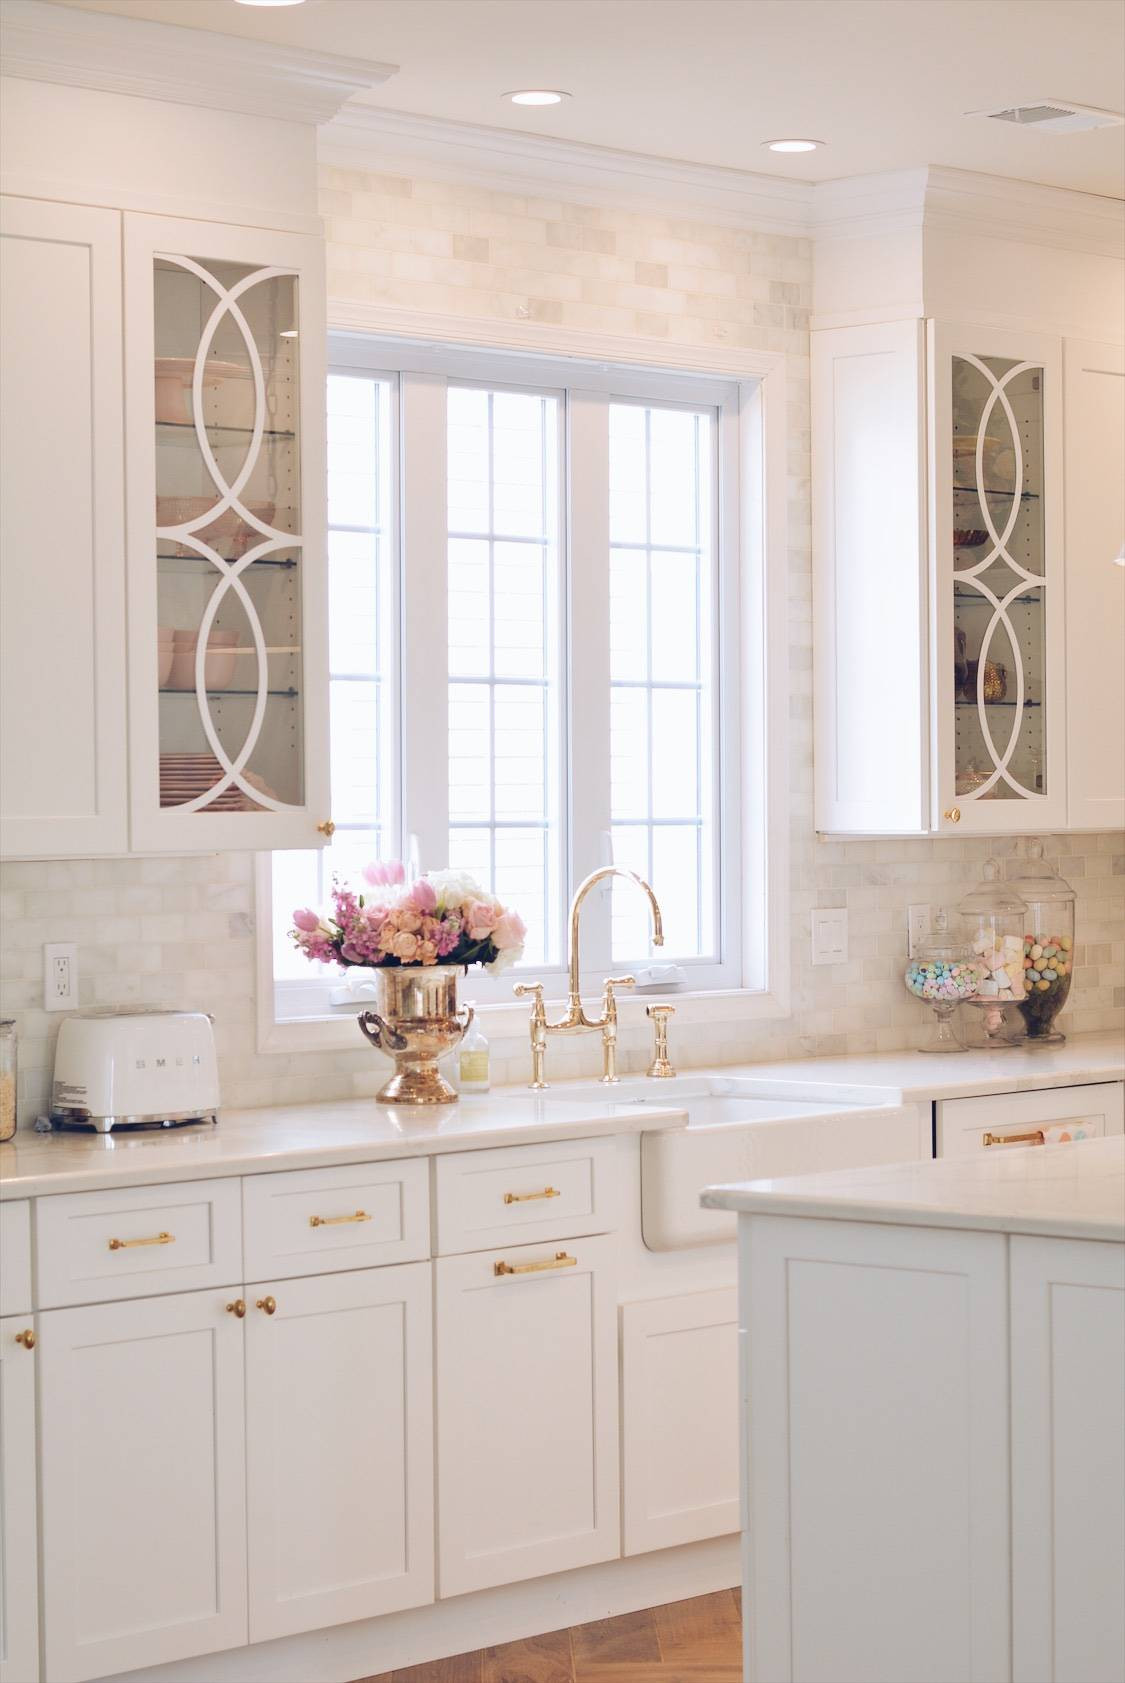 White Kitchen Cabinet Glass Doors
 Mullion Cabinet Doors How to Add Overlays to a Glass